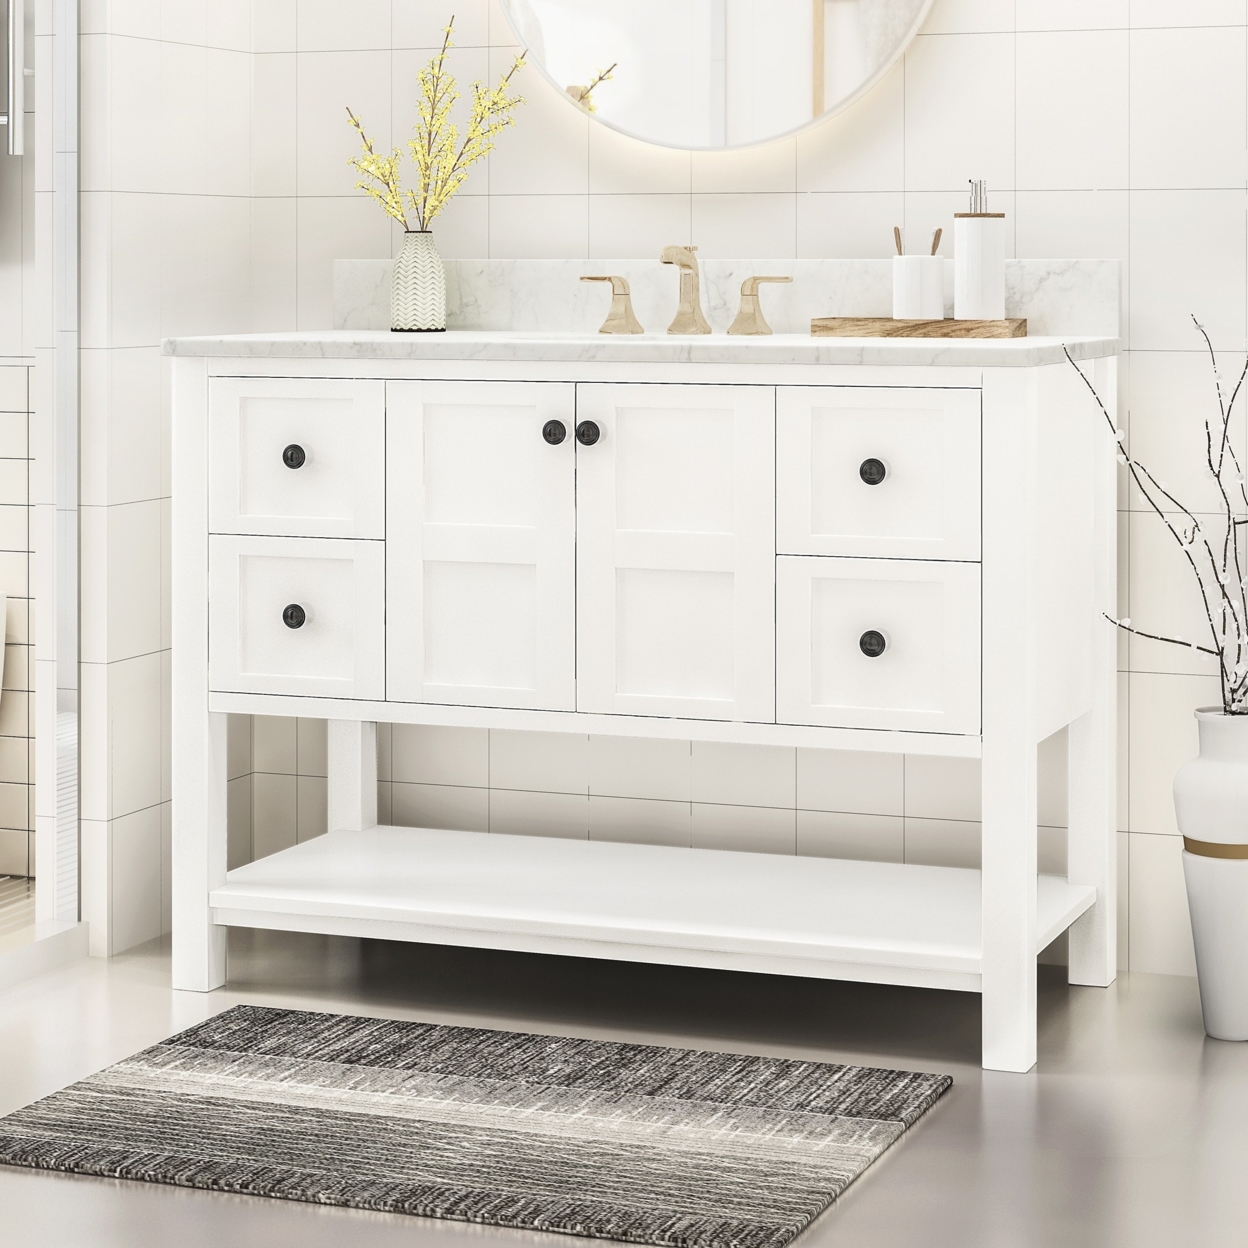 Jamison Contemporary 48 Wood Single Sink Bathroom Vanity With Marble Counter Top With Carrara White Marble - Gray